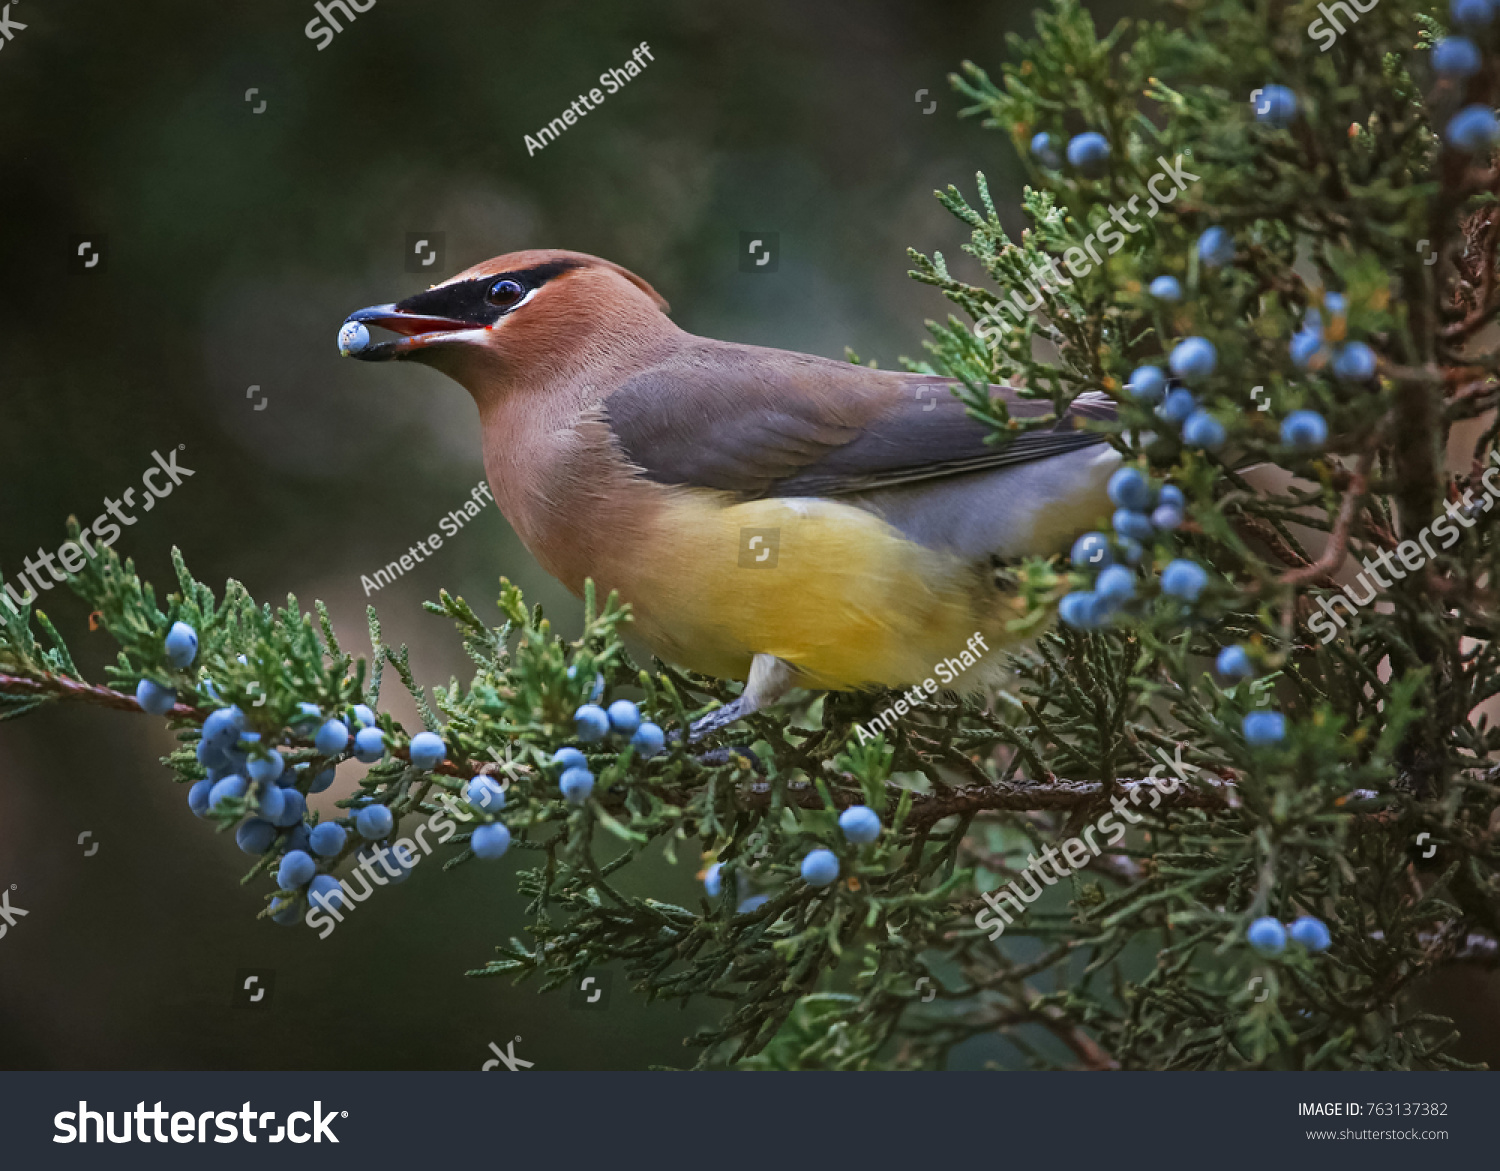 a cedar waxwing eating a blue berry off an evergreen tree in the winter time at twilight  #763137382